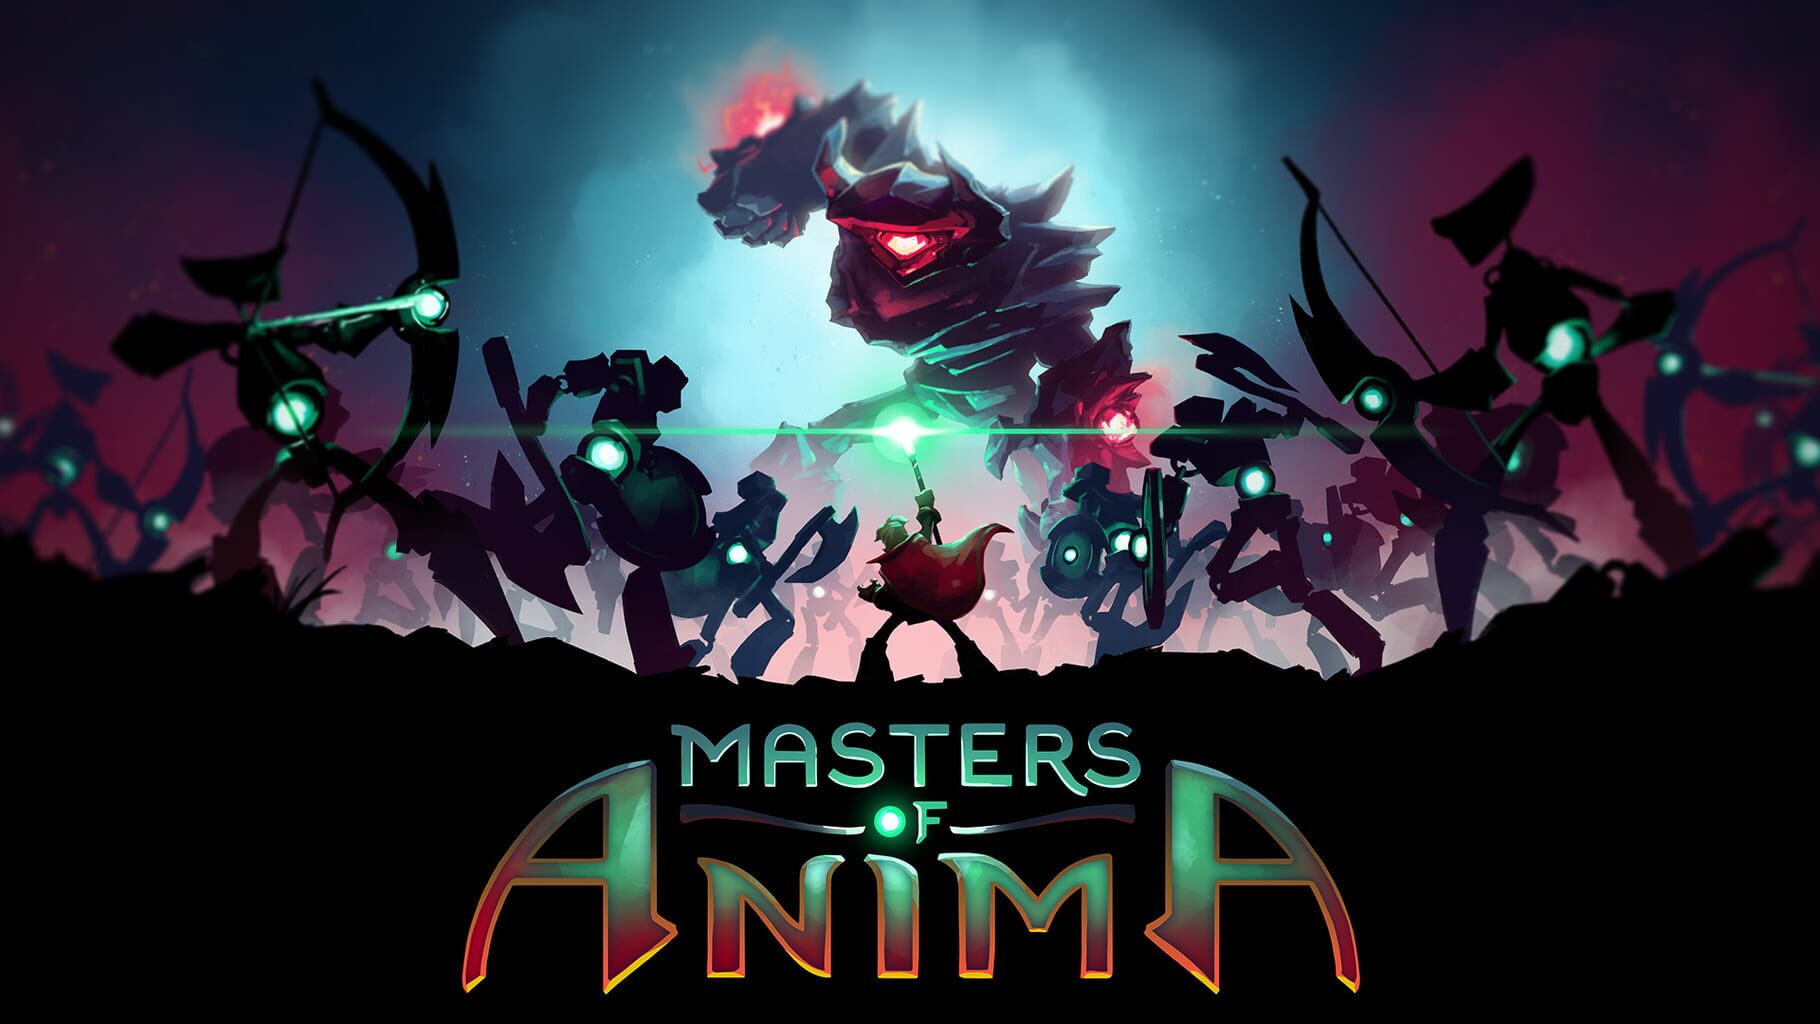 Artwork for Masters of Anima